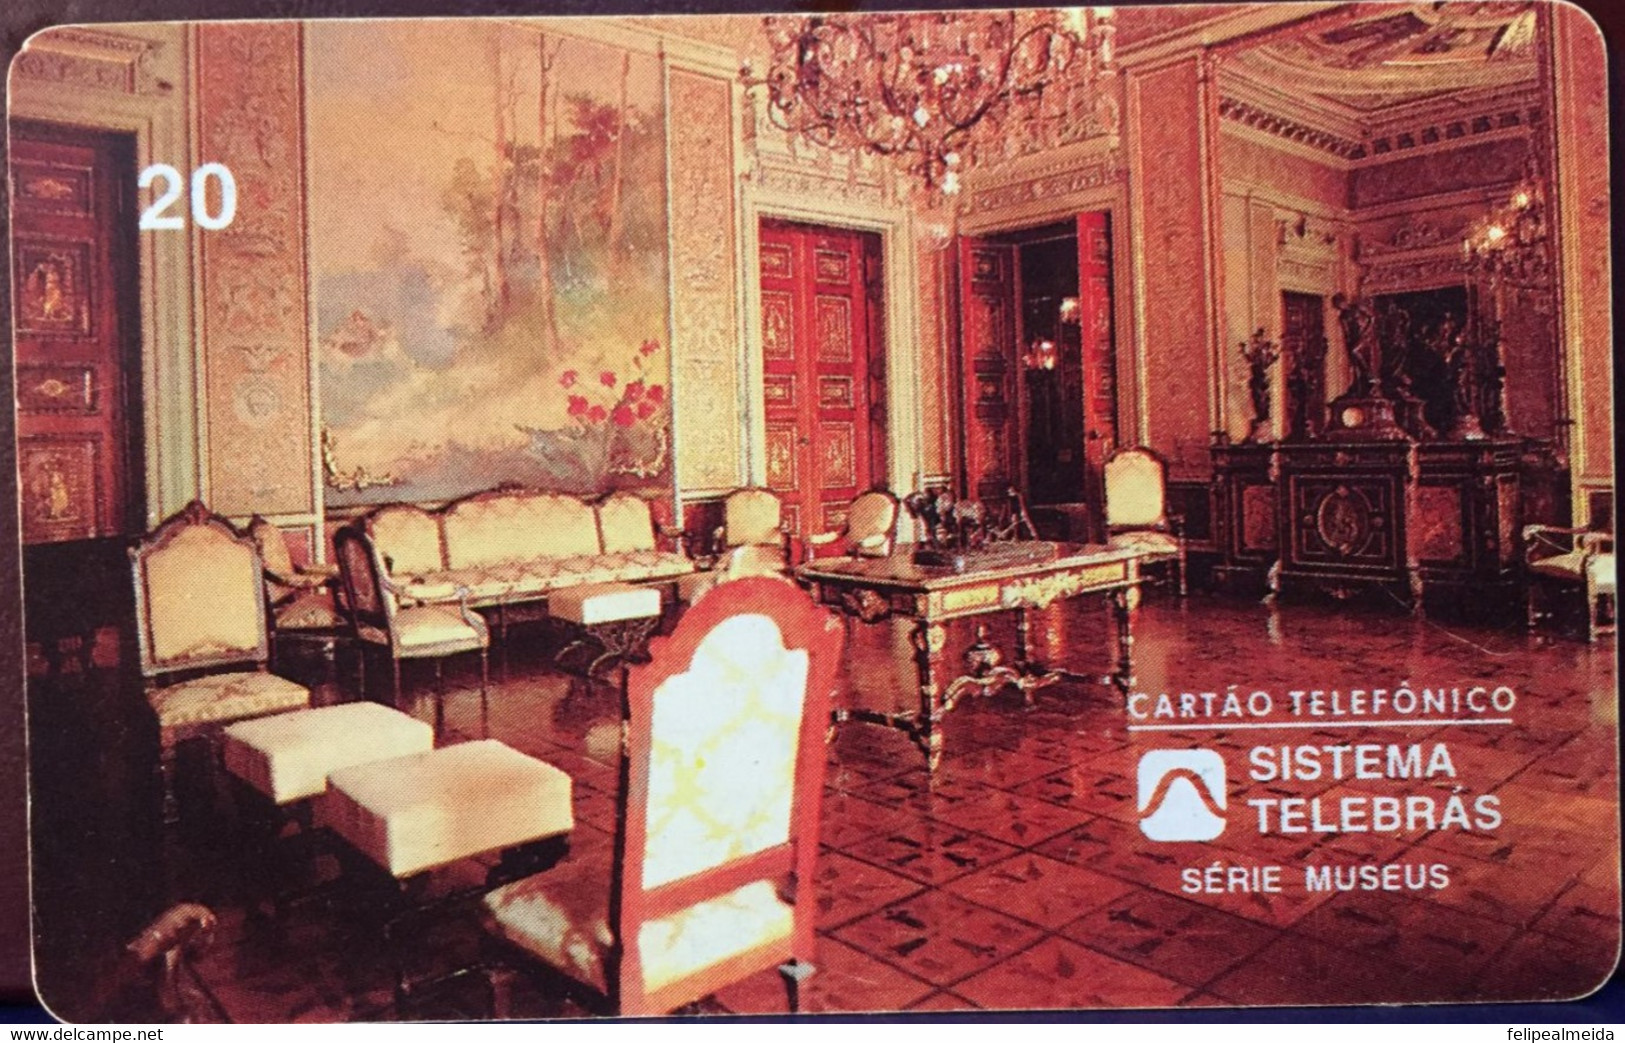 Phone Card Manufactured By Telebras In 1996 - Series Museums - Museum Of The Republic Of Rio De Janeiro - Venetian H - Cultural